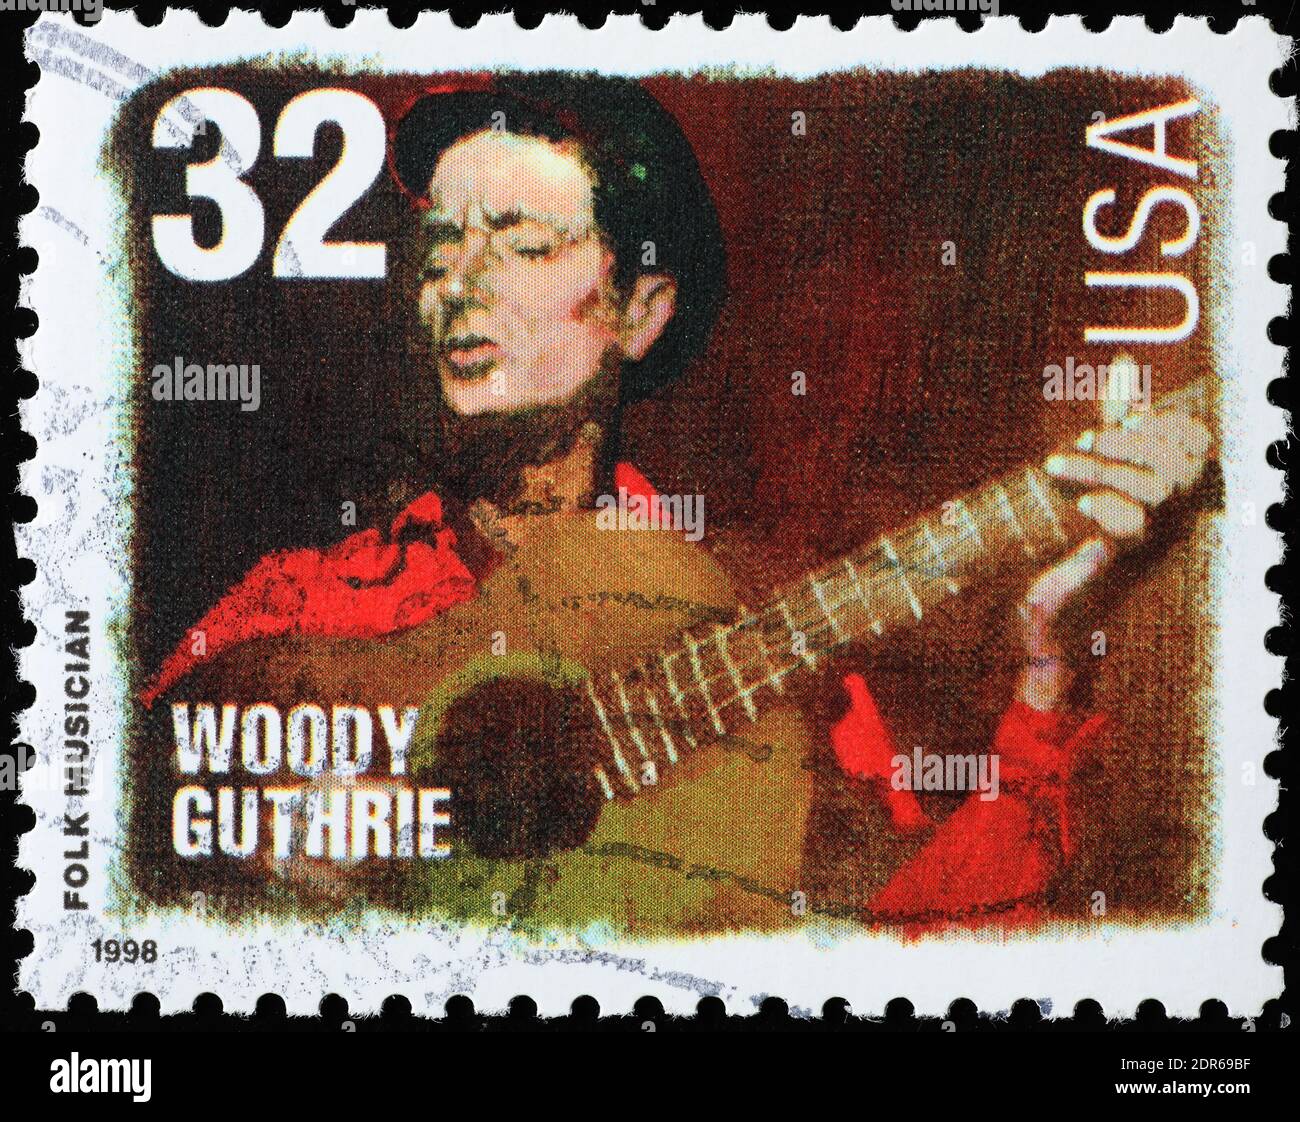 Woody Guthrie on american postage stamp Stock Photo